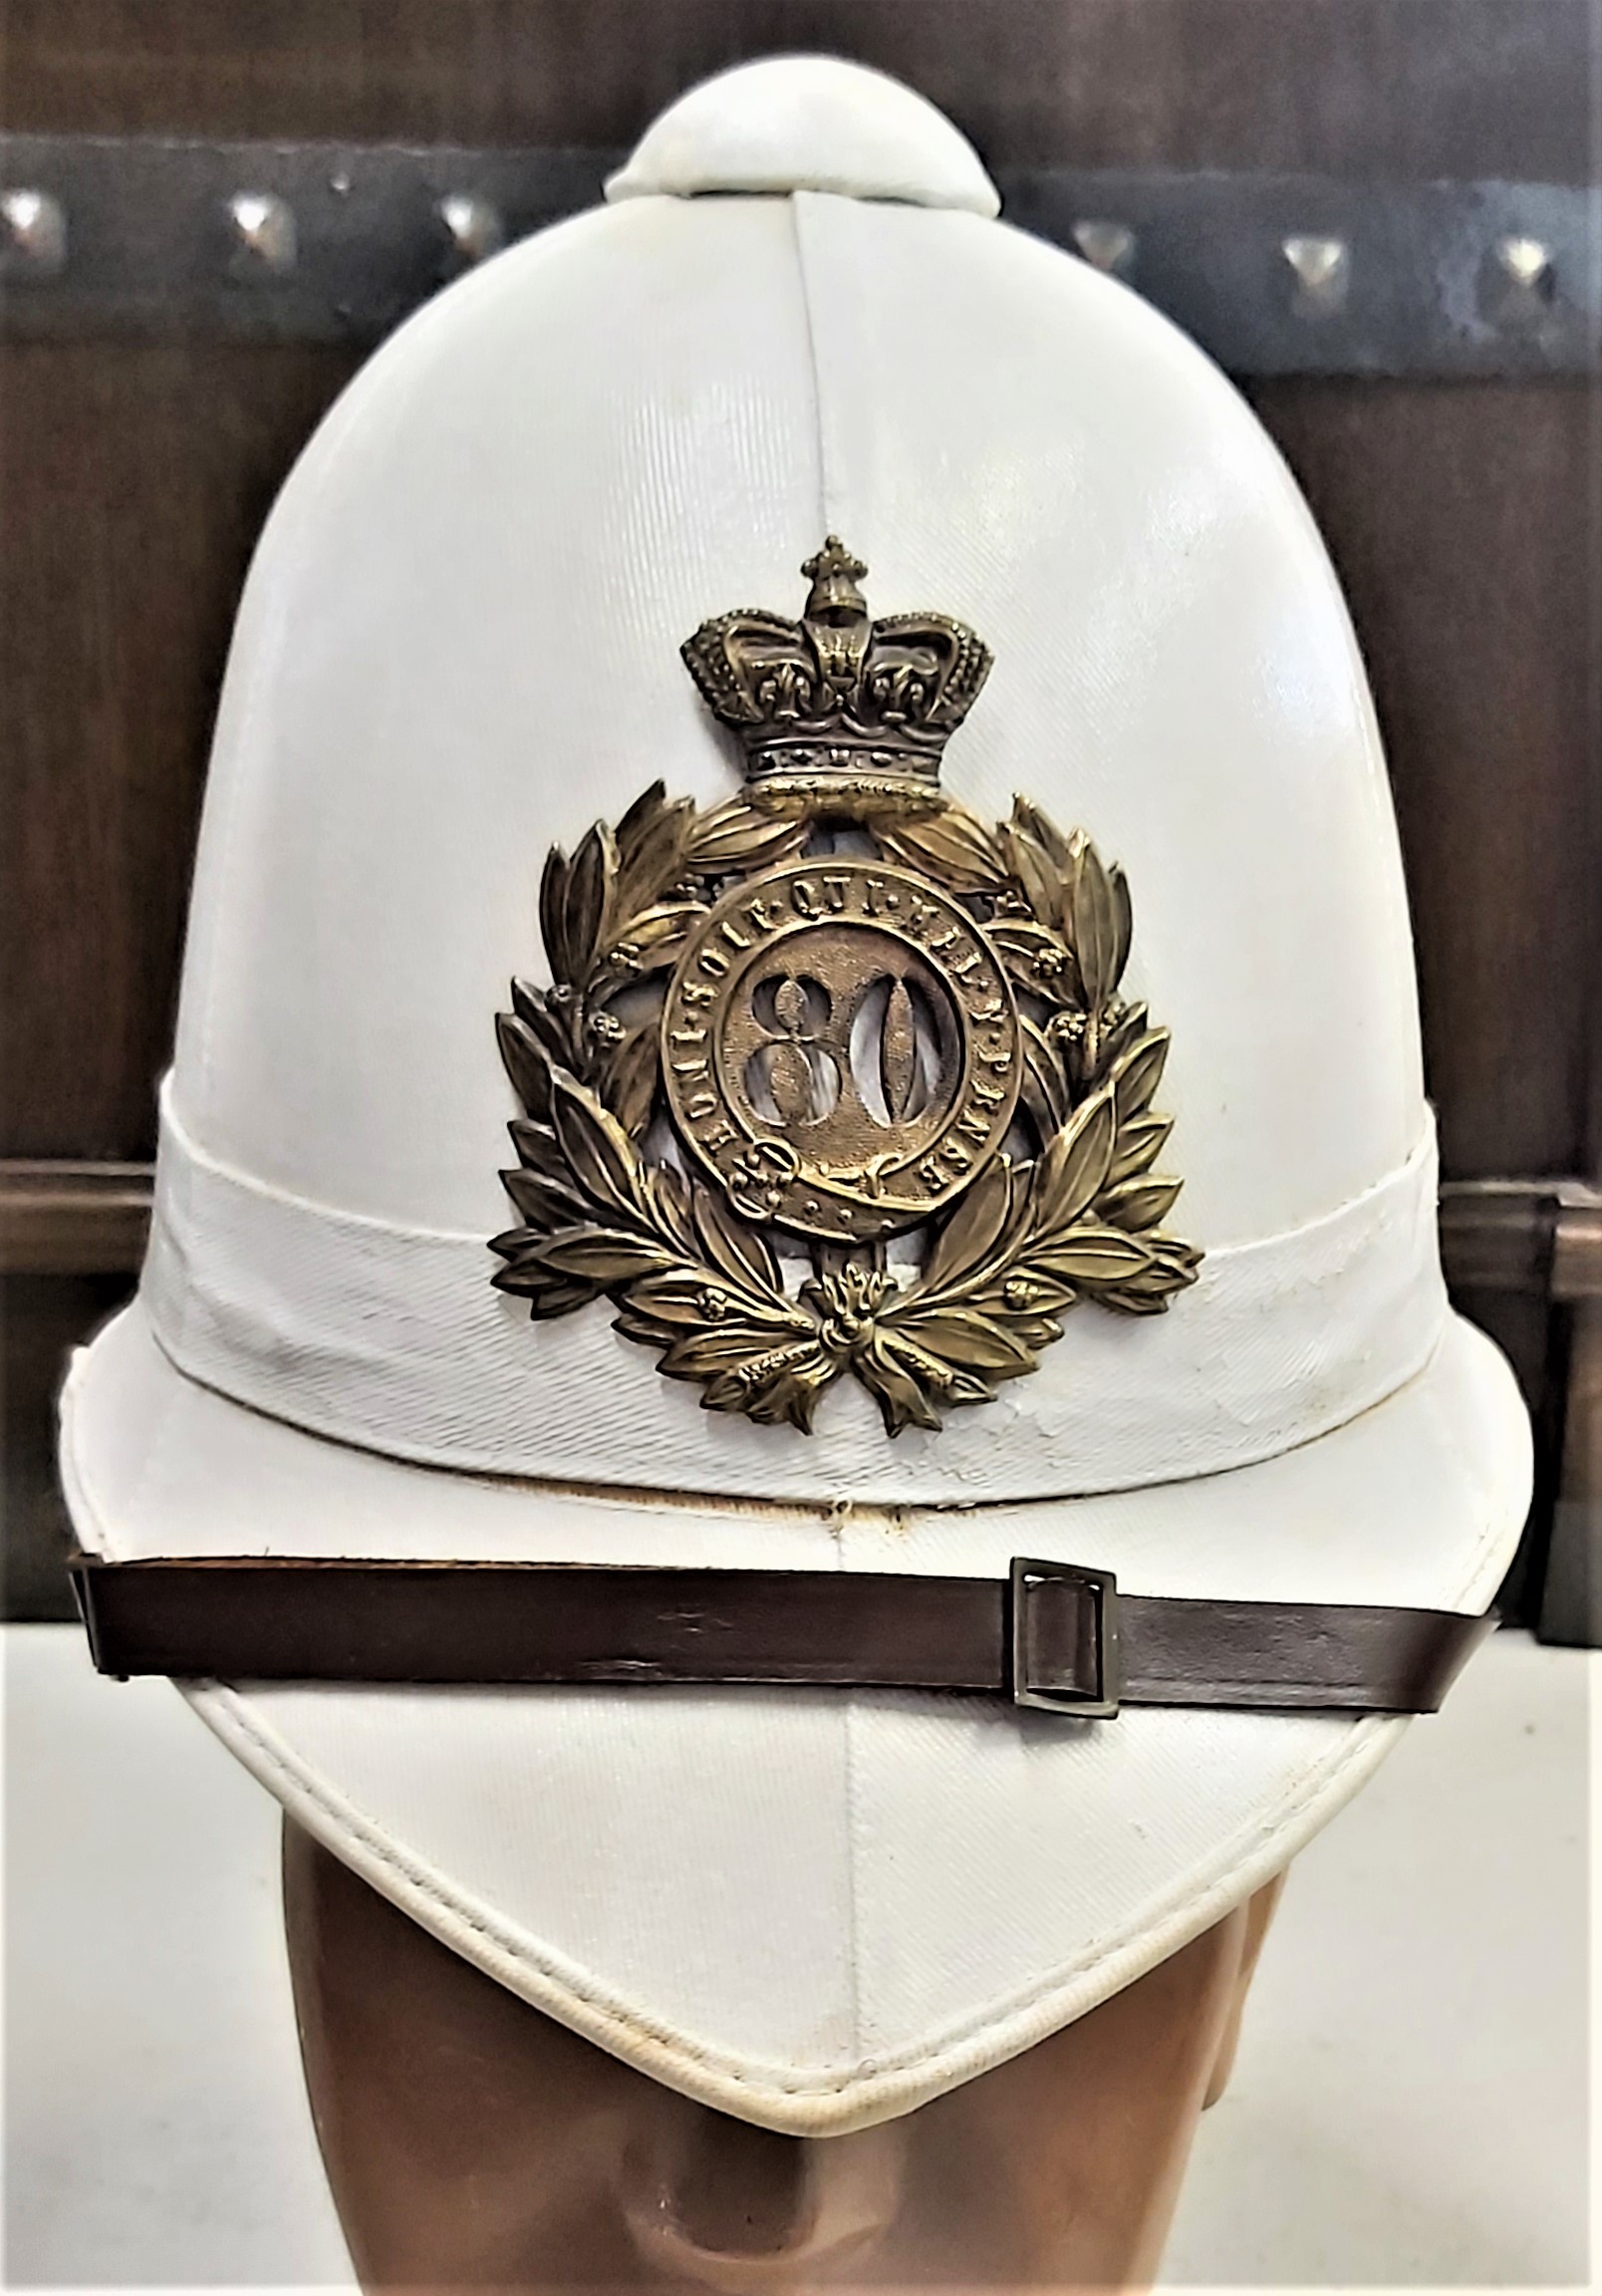 BRITISH PITH HELMET FOR THE 80TH REGIMENT - PROBABLY A REPRODUCTION ...